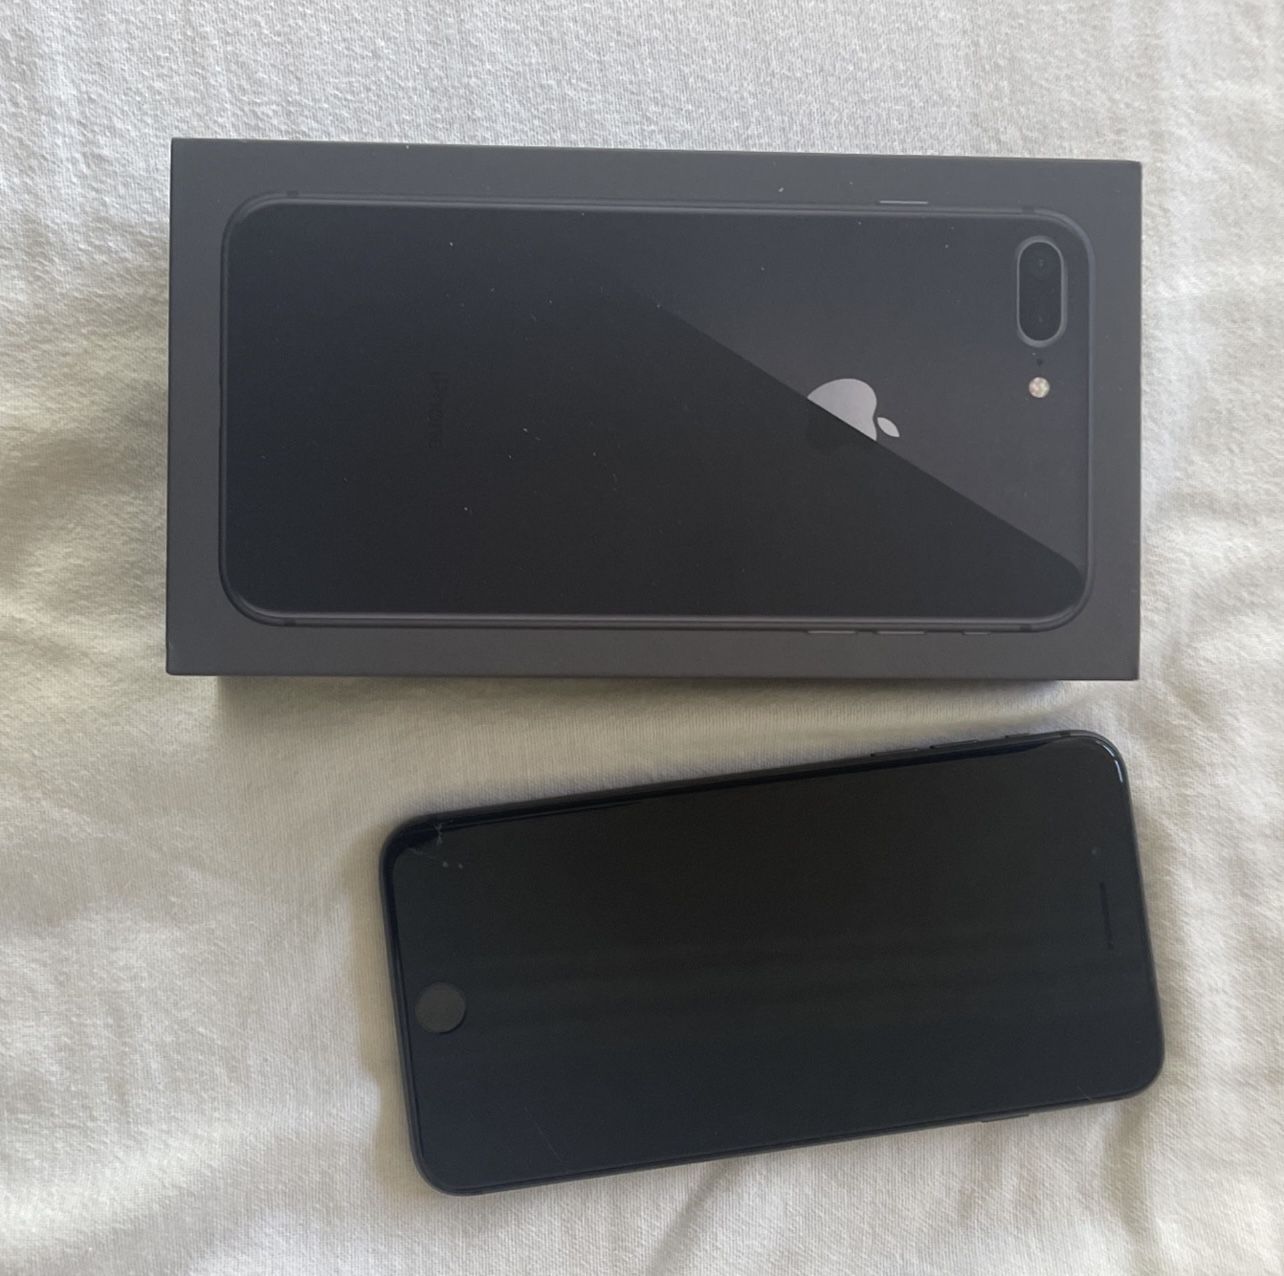 Iphone 8 Plus Space Gray 256GB for Sale in Fremont, CA - OfferUp